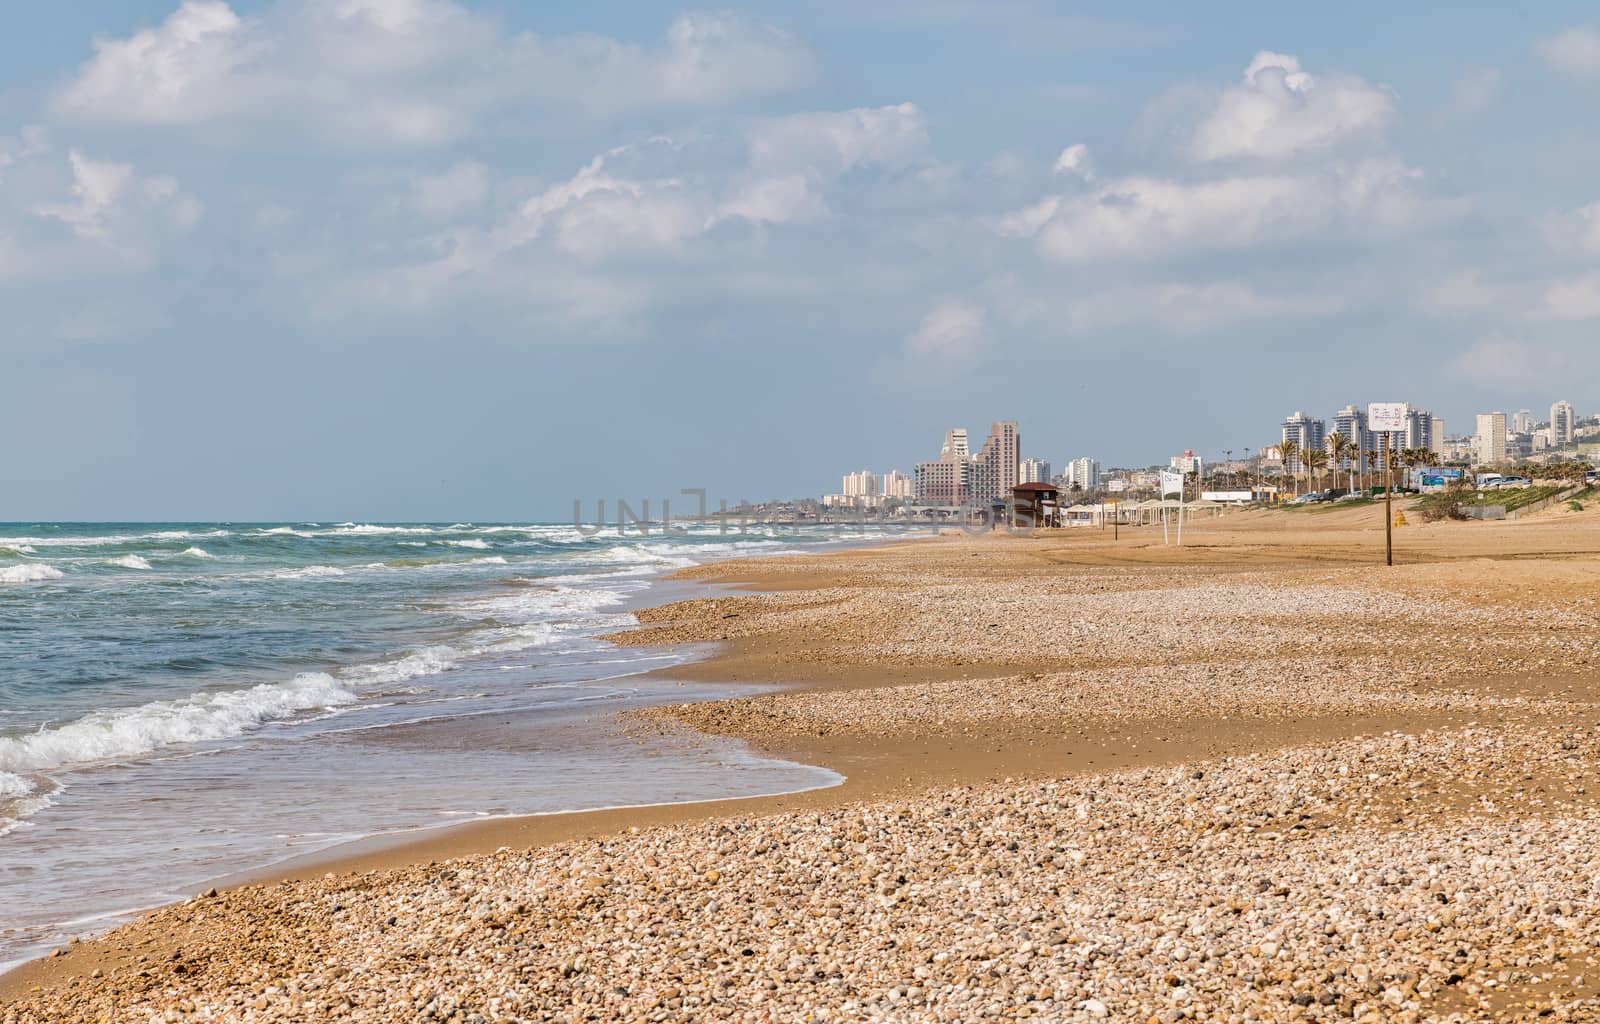 the haifa beach in israel with the city as background and a raw sea with waves at the coastline